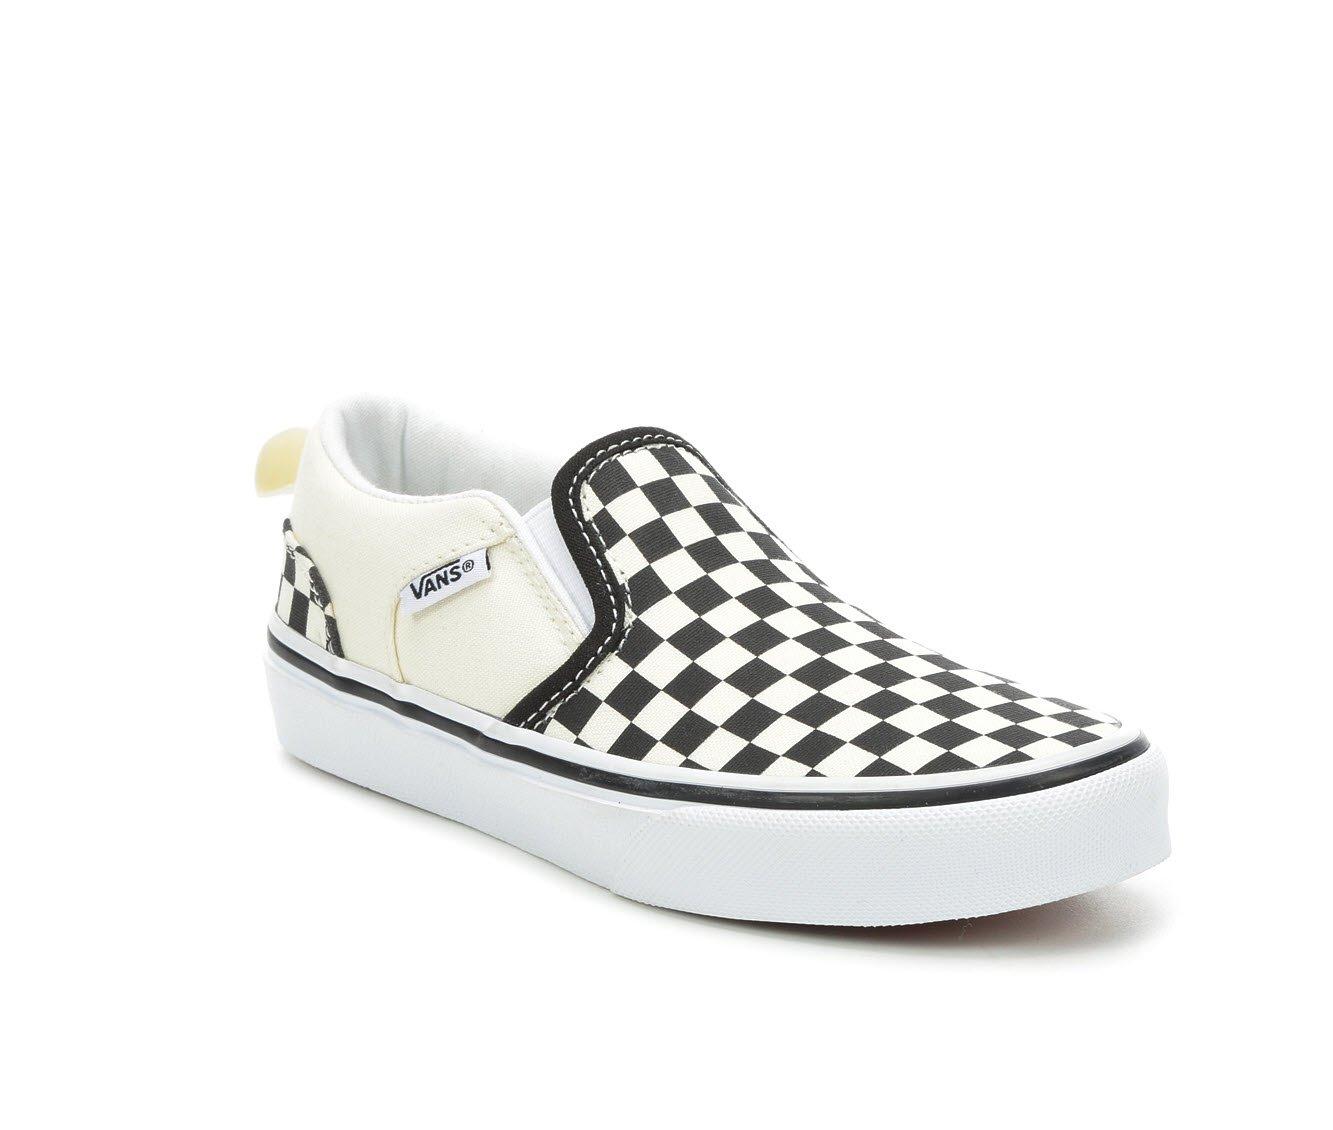 Vans Lace Up Black/White Checkerboard Skate Shoes Sneakers - Kids Youth  Size 13